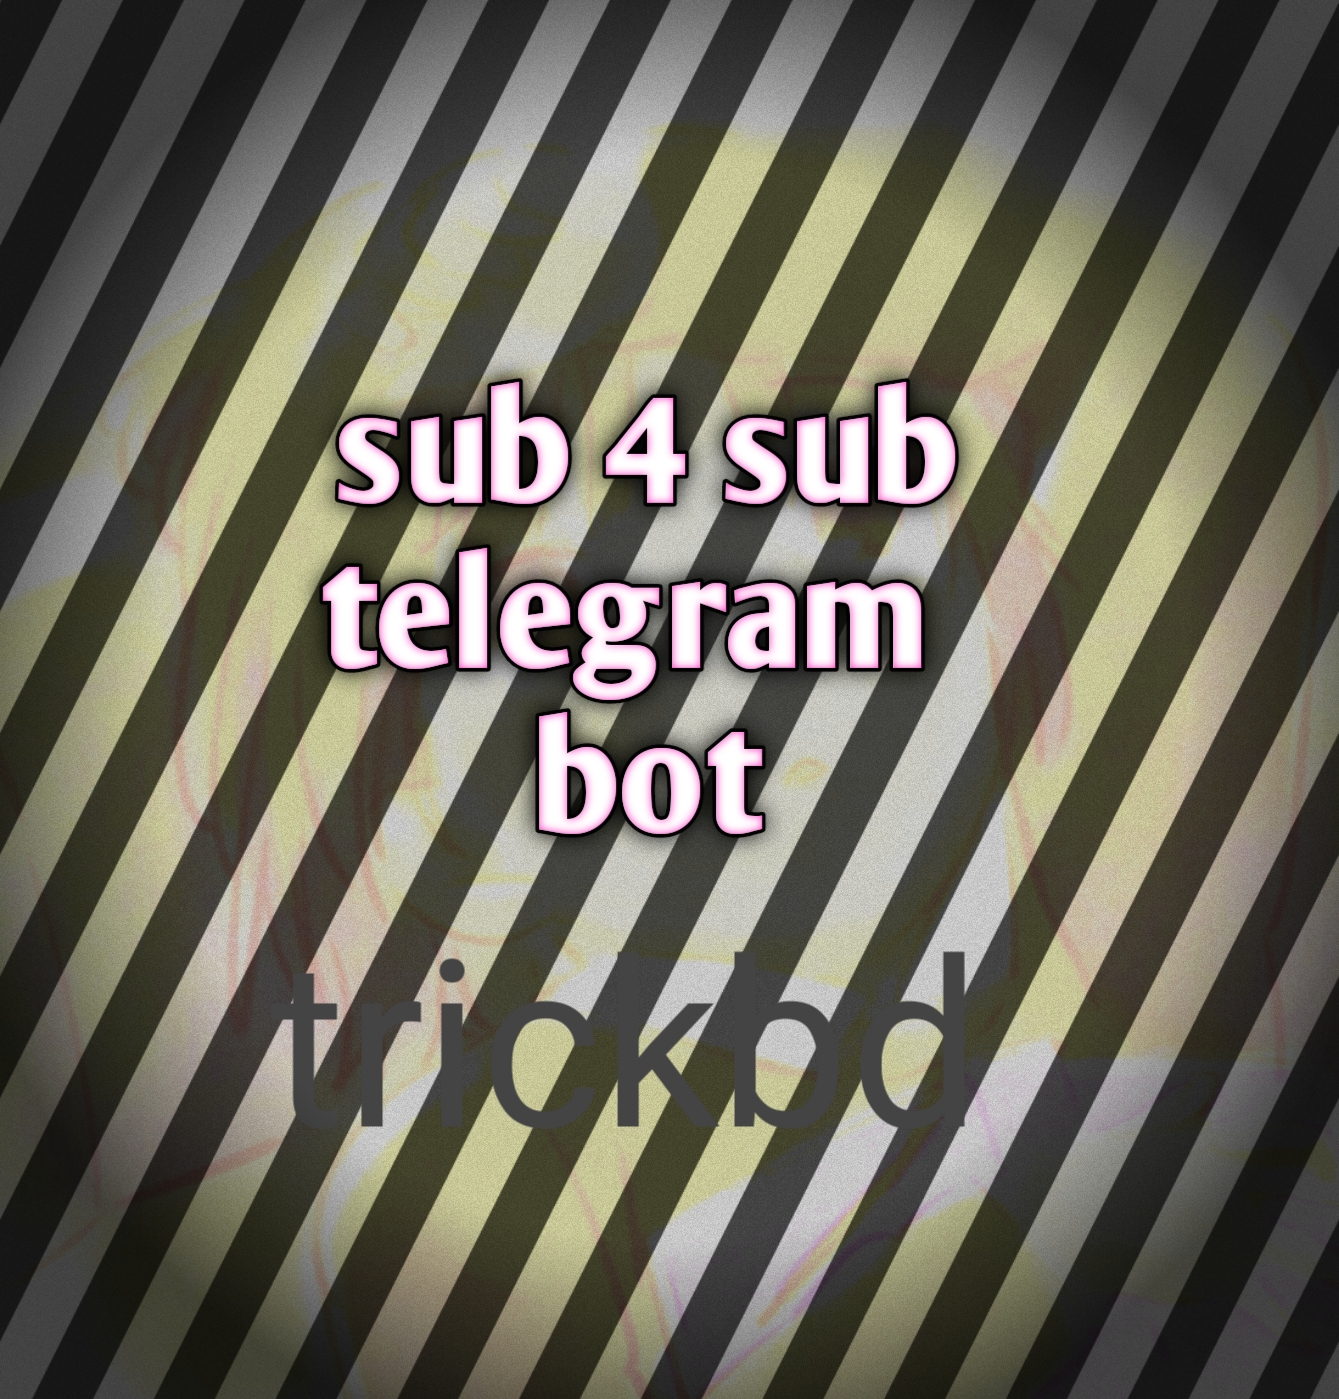 Sub 4 sub telegram bot || sub 4 sub telegram group and channel || add campaign tg,yt,post, and any link views